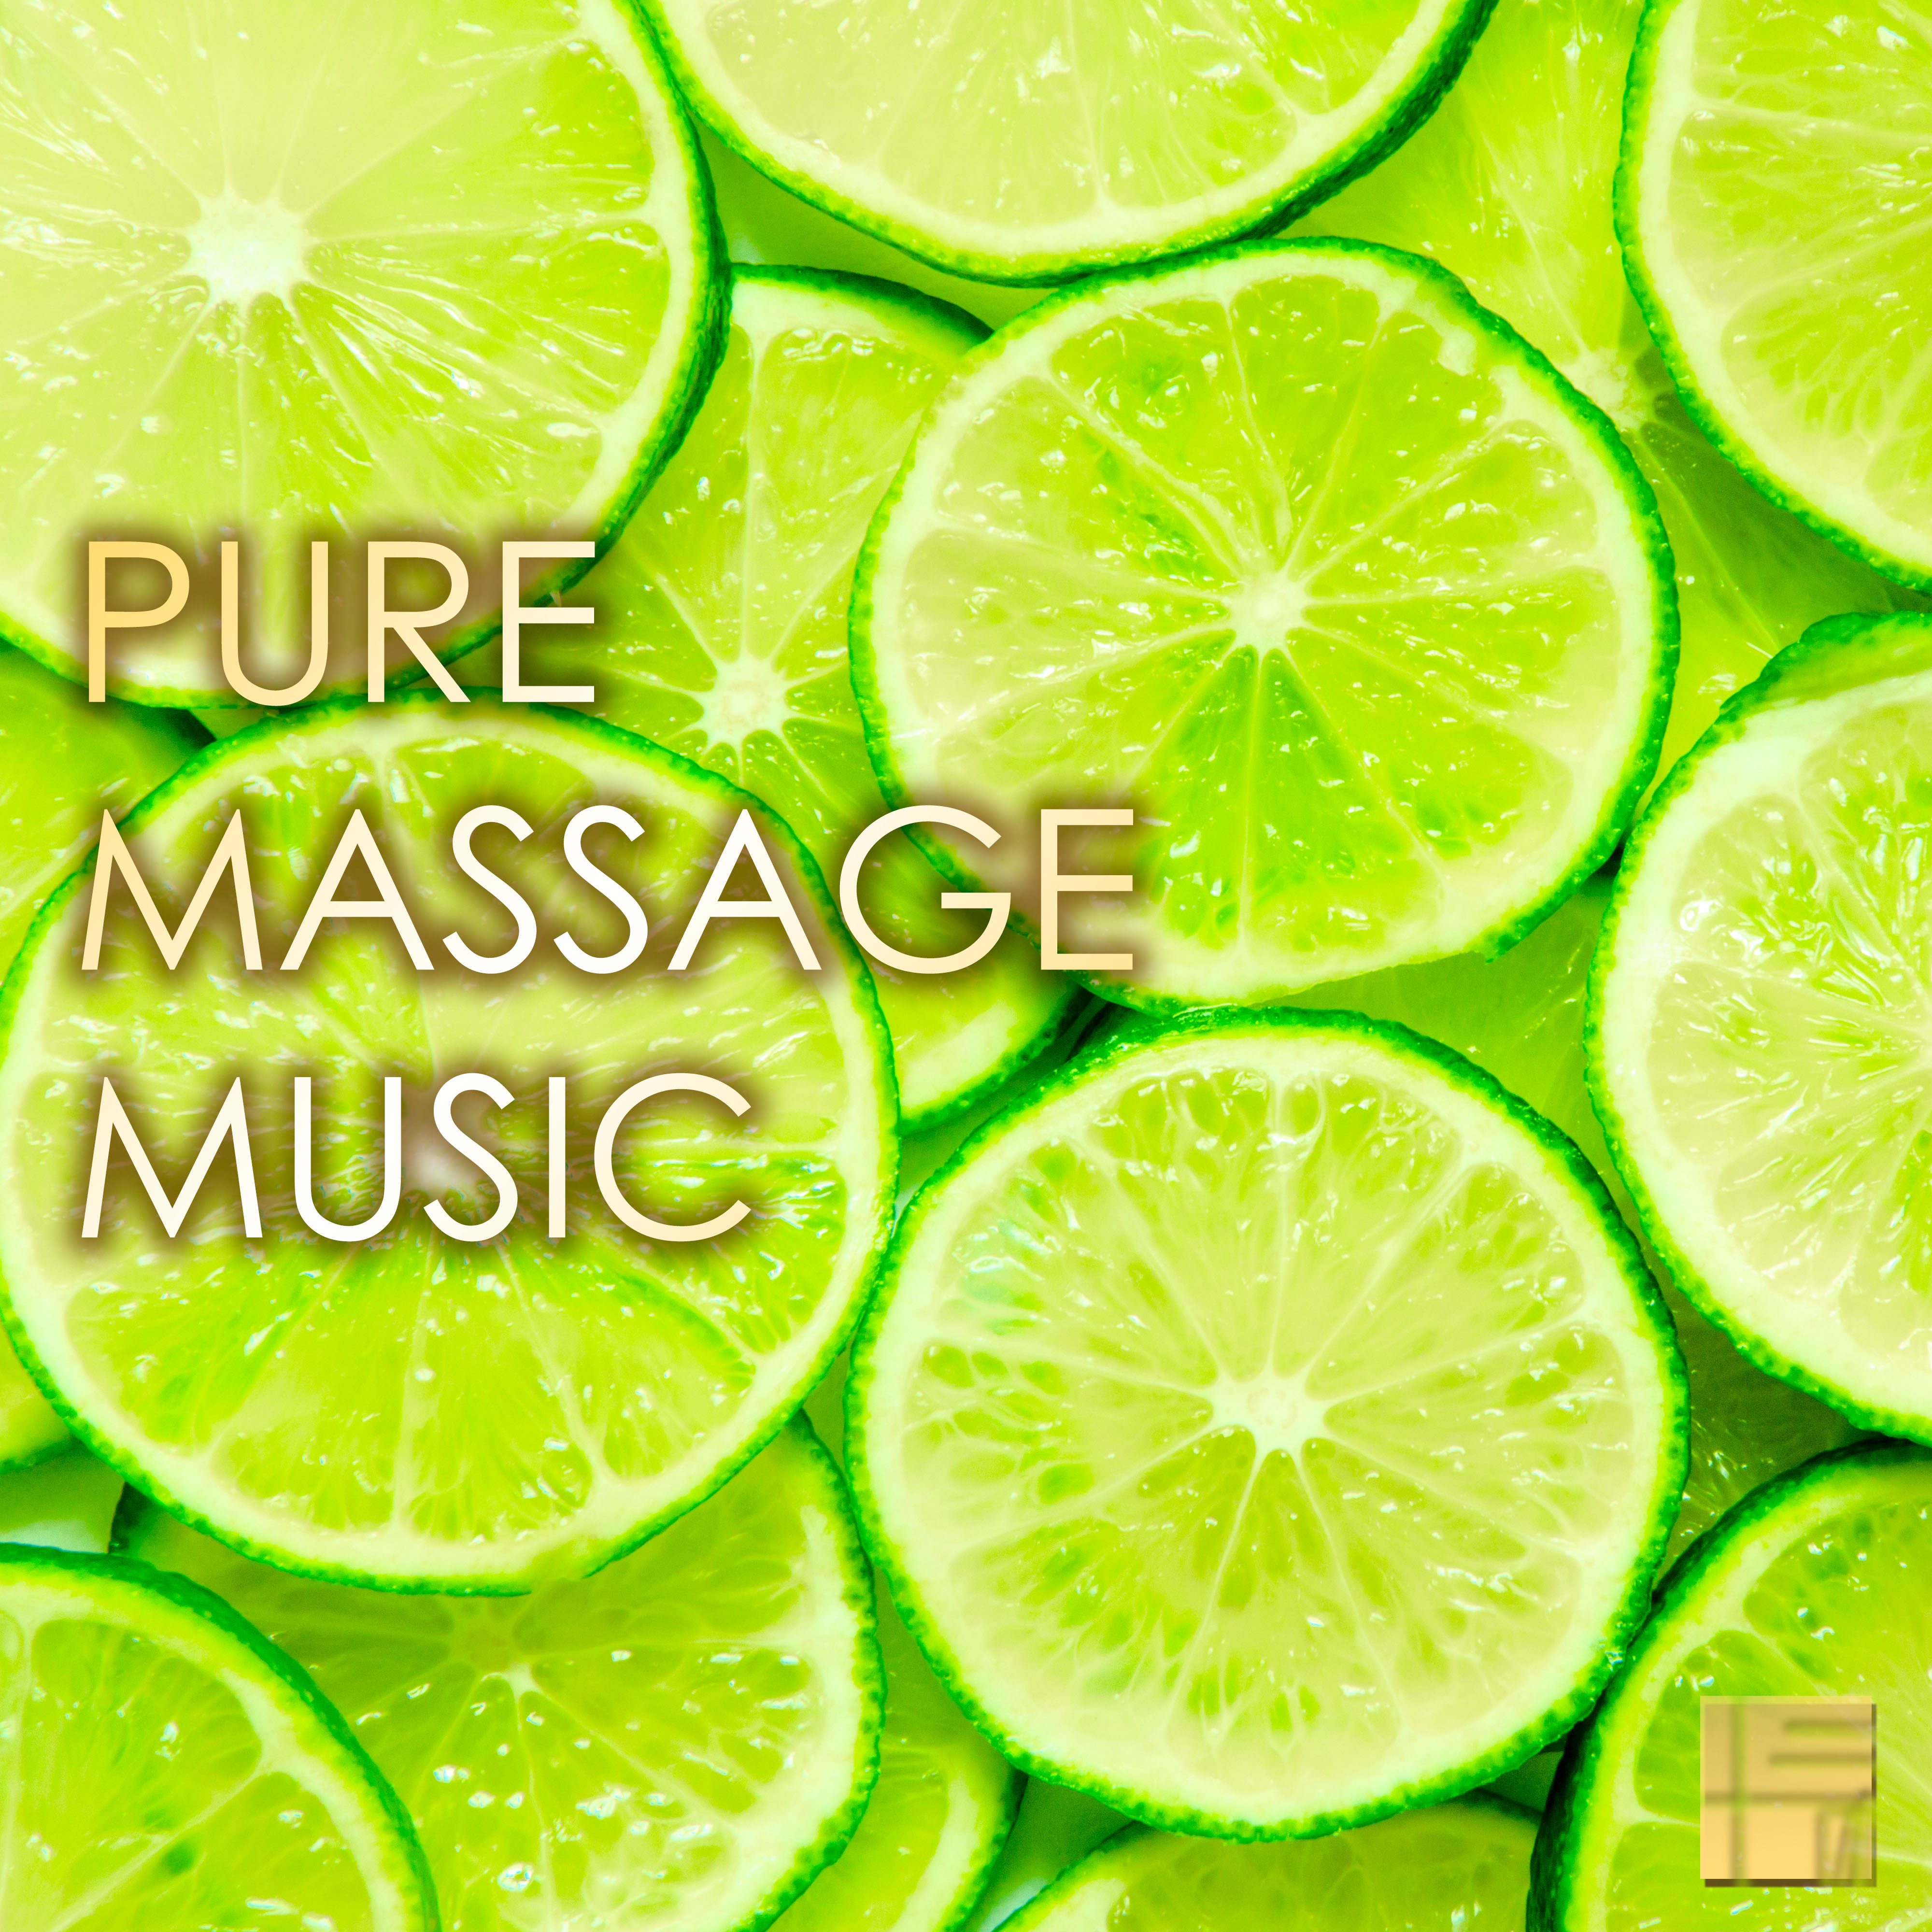 Pure Massage Music - Relaxing Background Music for Massage & Gentle Sounds of Nature, Day Spa Stress Relief